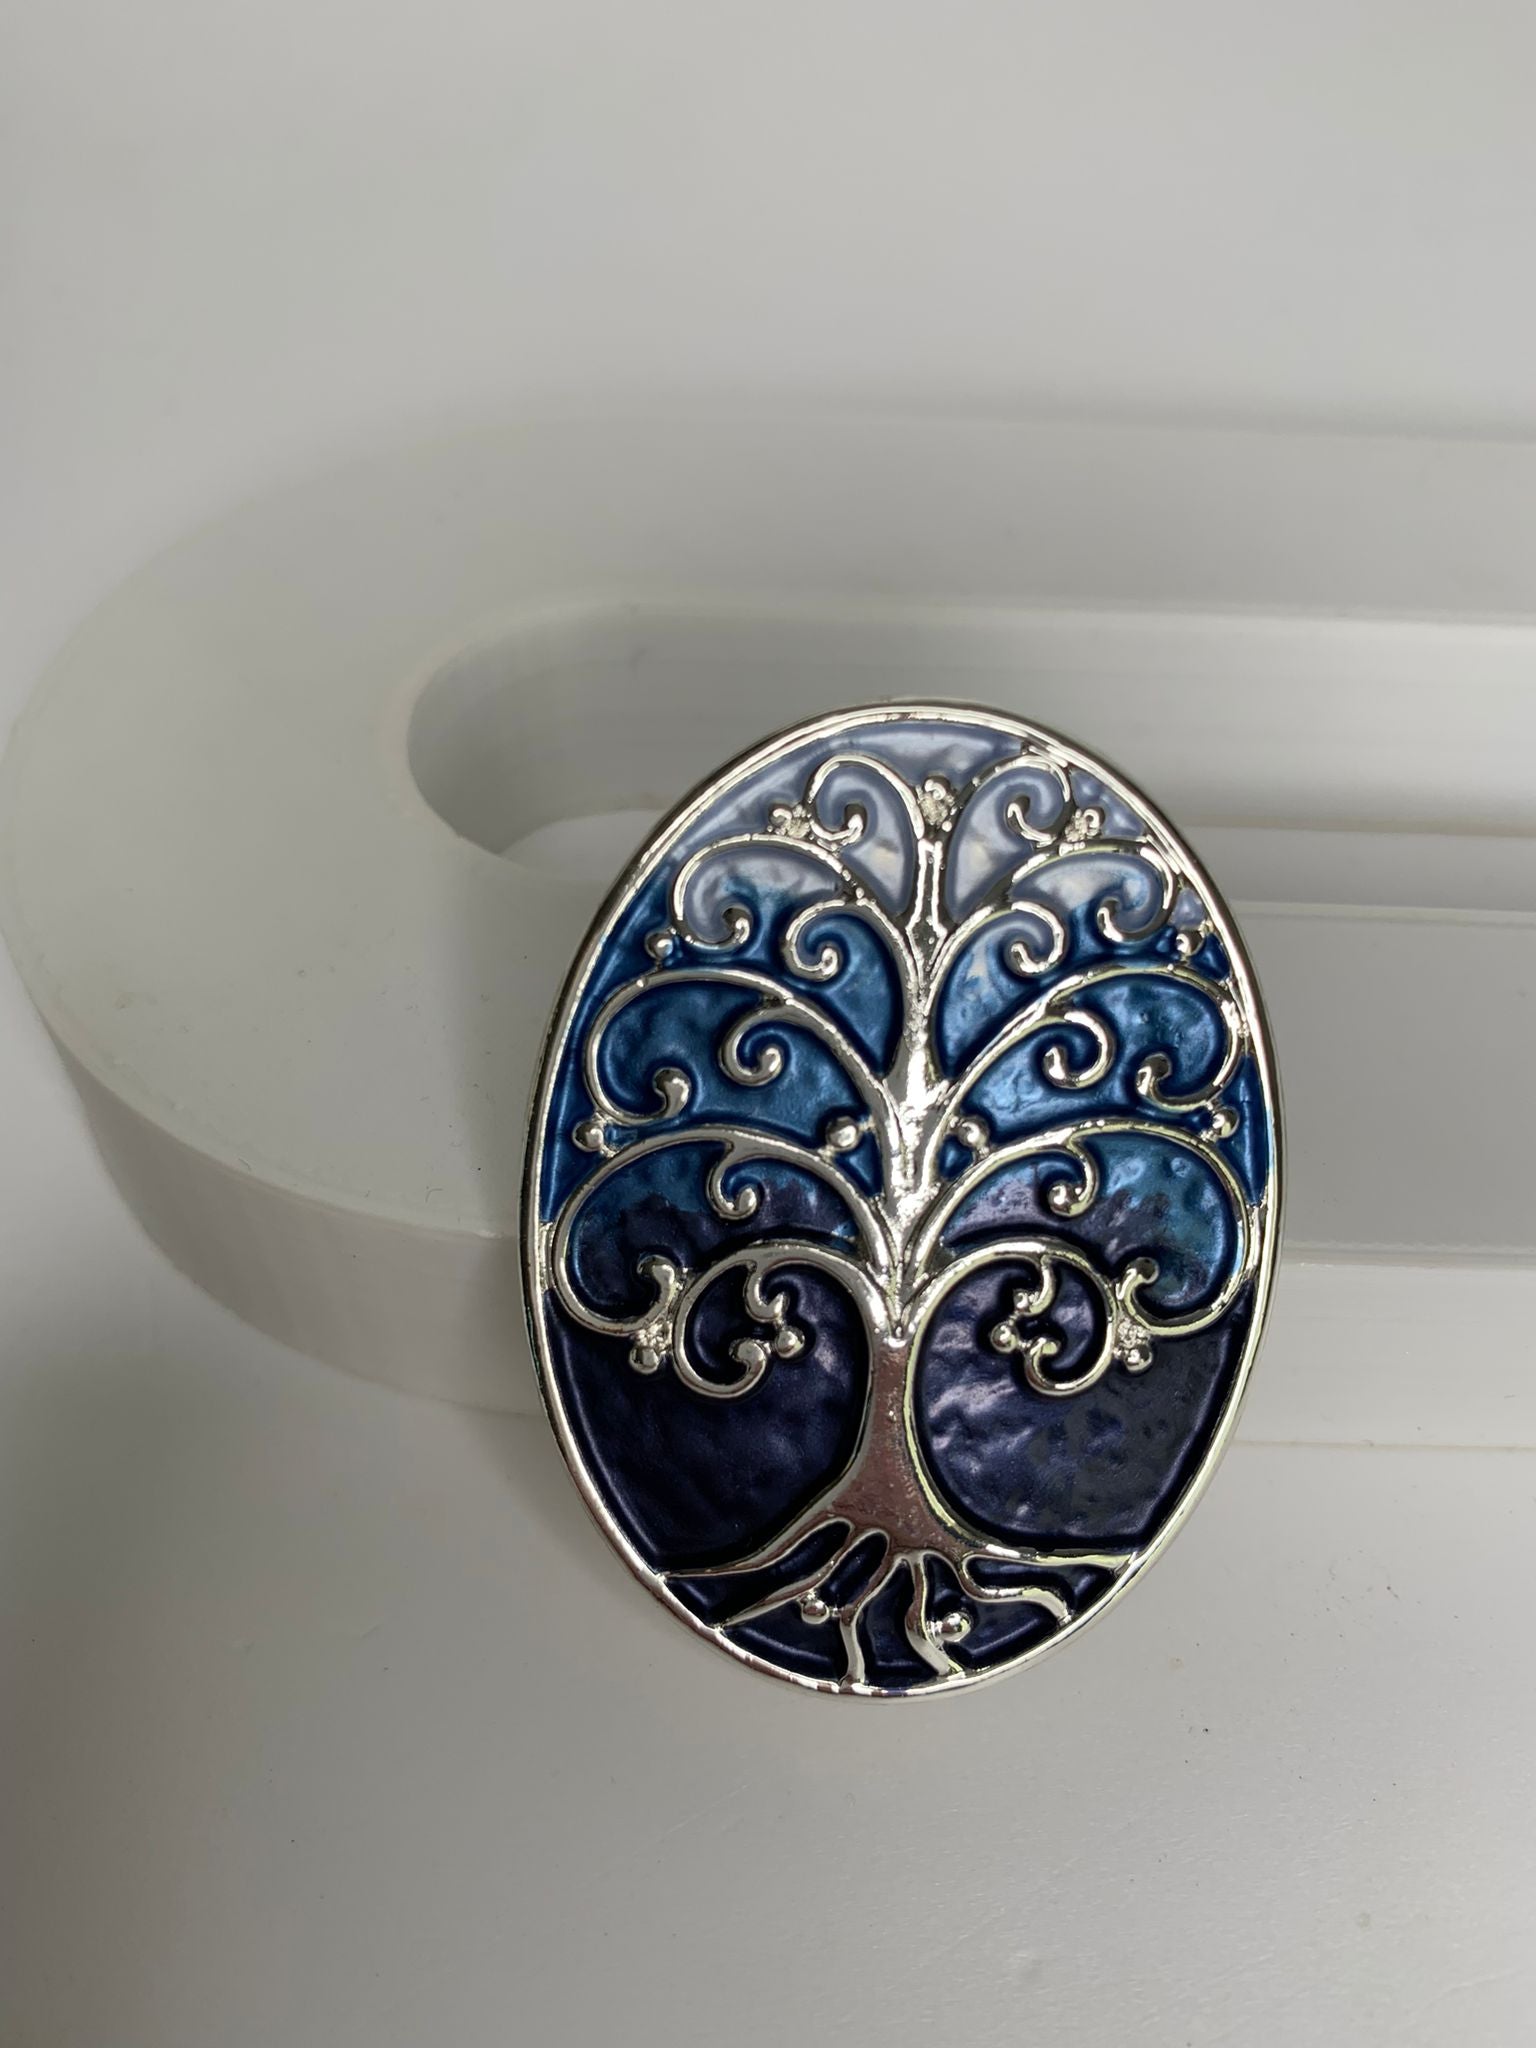 Magnetic brooch & scarf clip  - 'curly tree' design in shades of shiny silver and navy